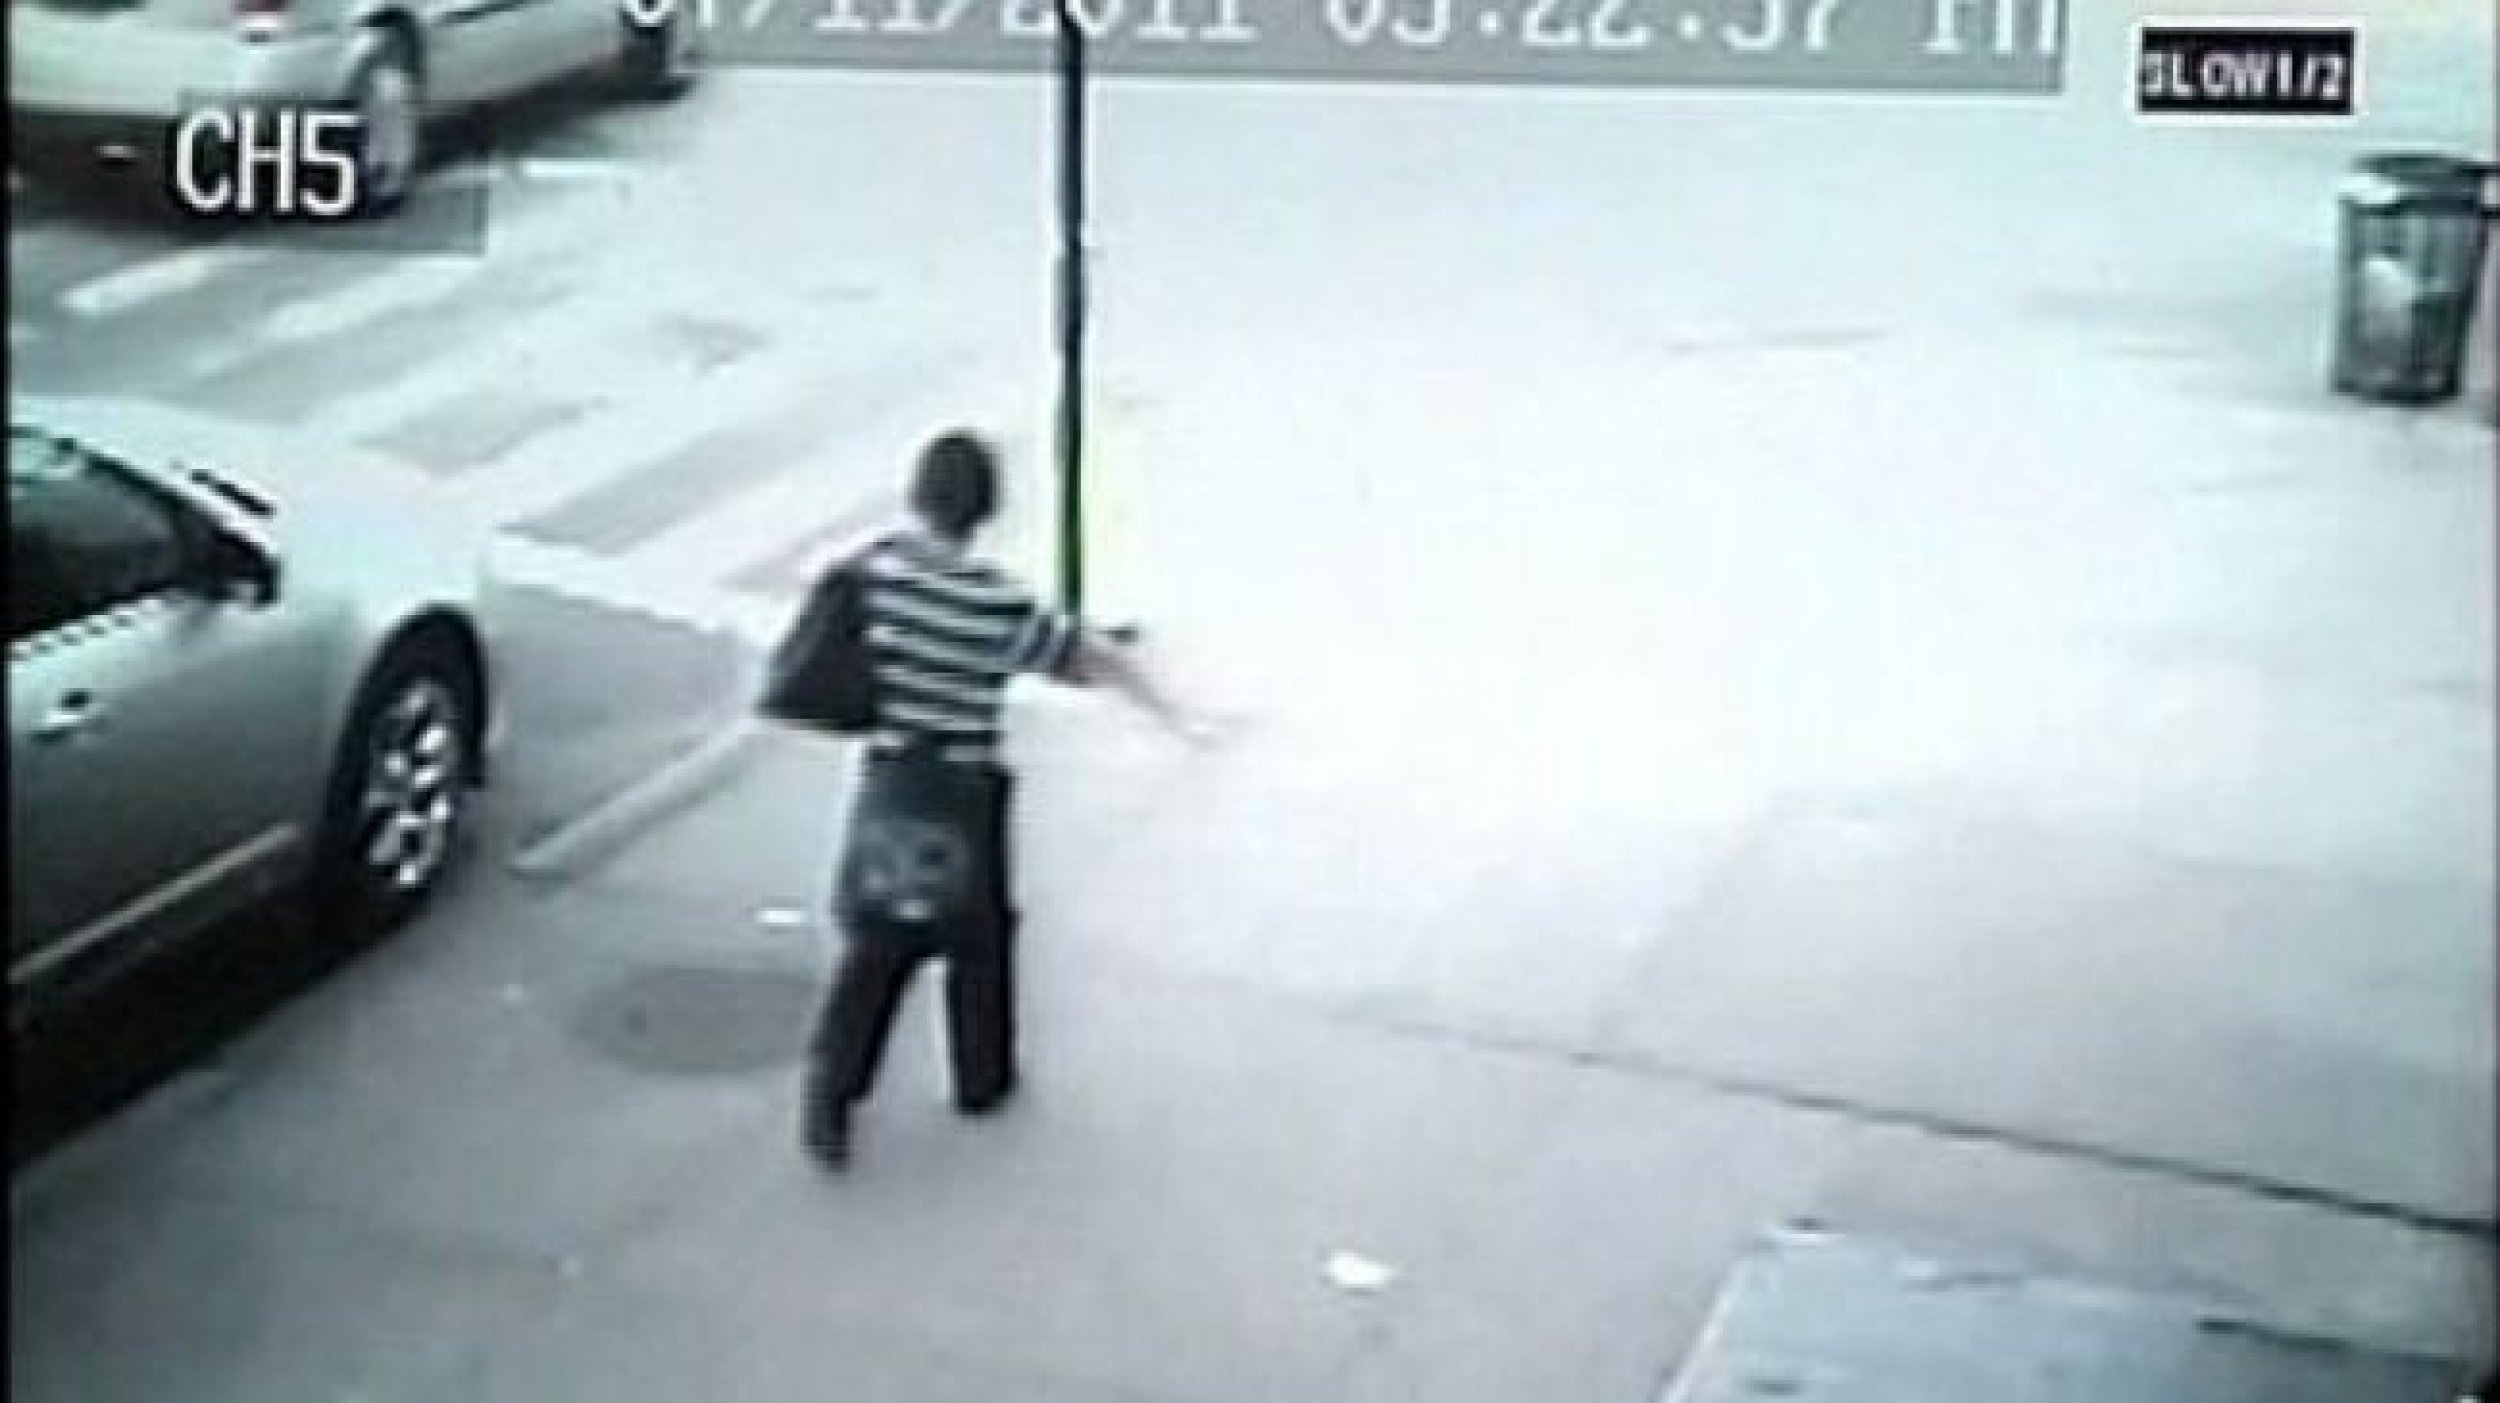 RAW VIDEO SURVEILLANCE VIDEO OF MURDERED 8-YEAR-OLD HASIDIC BOY, LEIBY KLETZKY FROM BROOKLYN